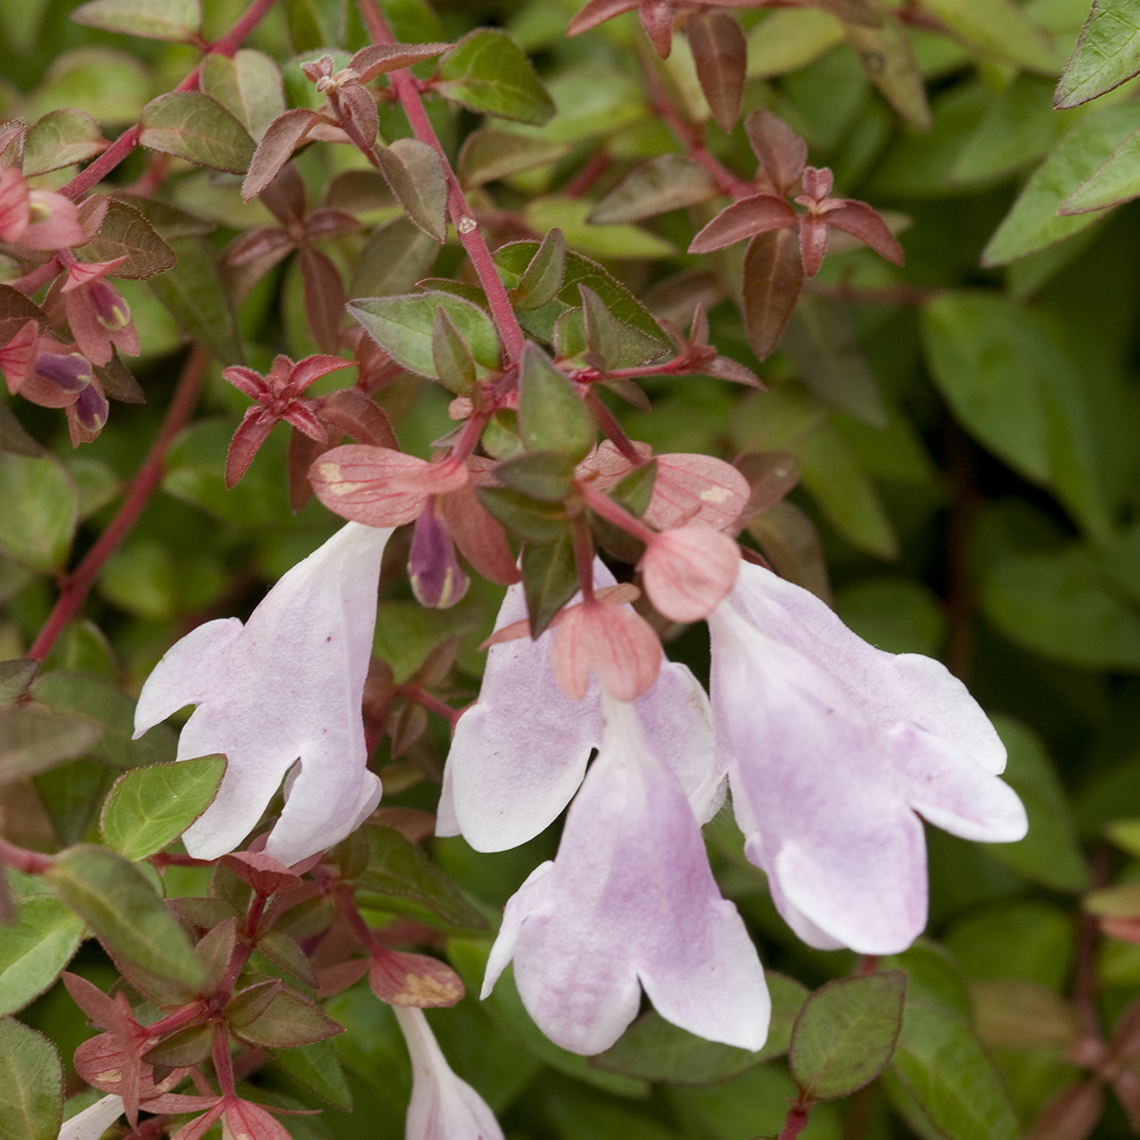 Close up of Pinky Bells Abelia's bell-shaped flowers